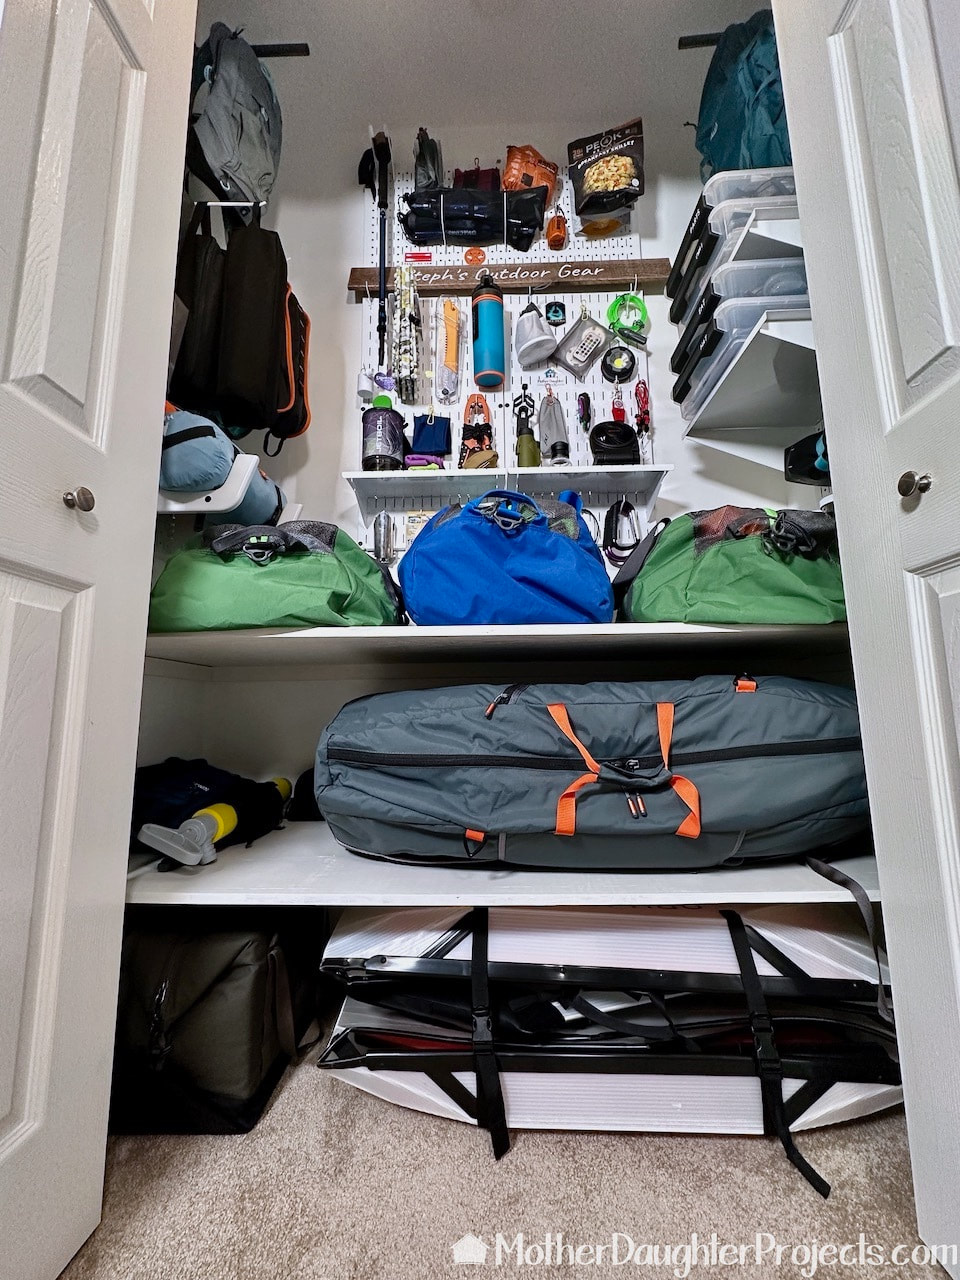 The small closet renovation now holds all the camping equipment as well as two Oru kayaks.